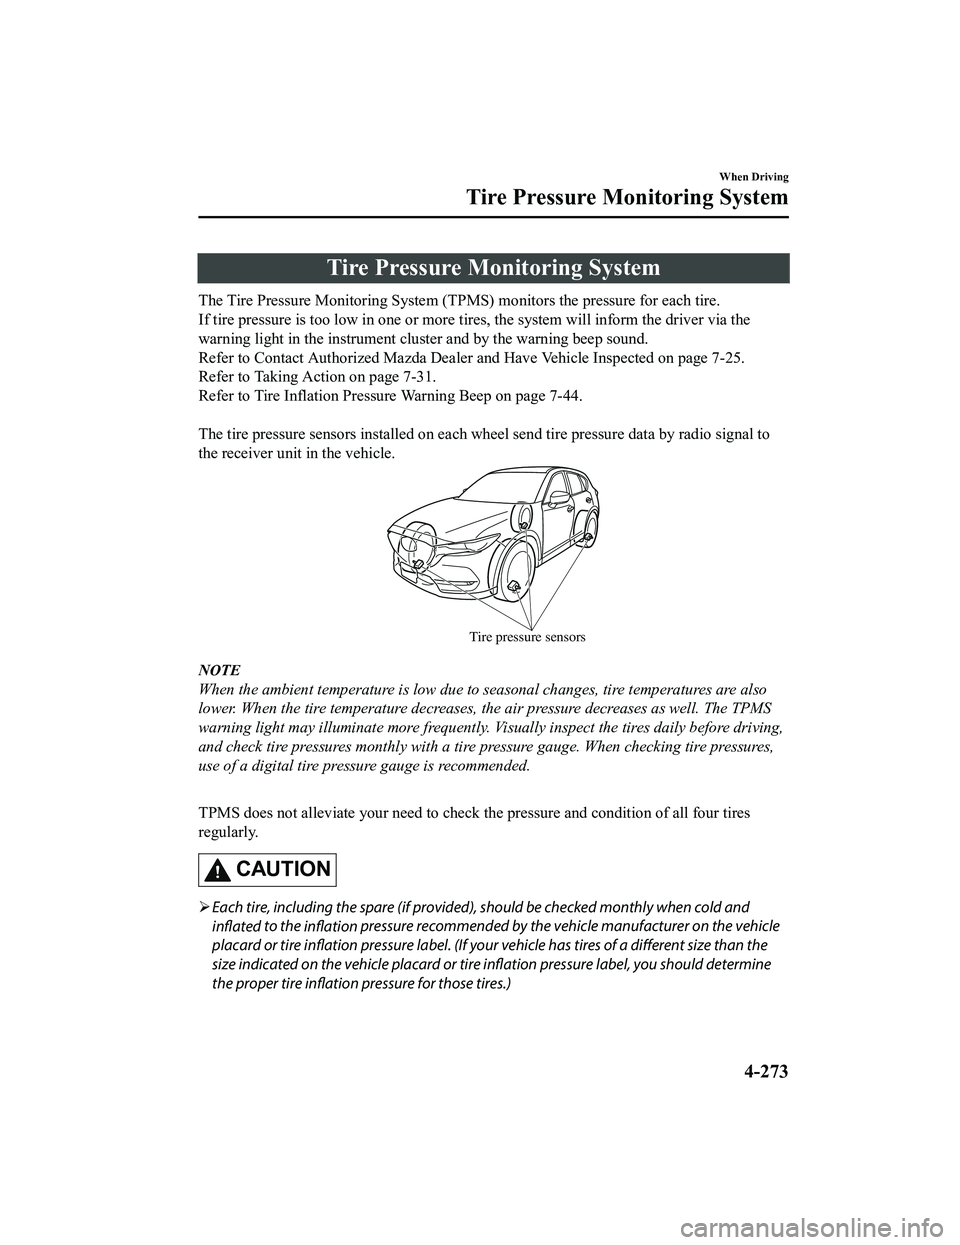 MAZDA MODEL CX-5 2022  Owners Manual Tire Pressure Monitoring System
The Tire Pressure Monitoring System (TPMS) monitors the pressure for each tire.
If tire pressure is too low in one or more t ires, the system will inform the driver via